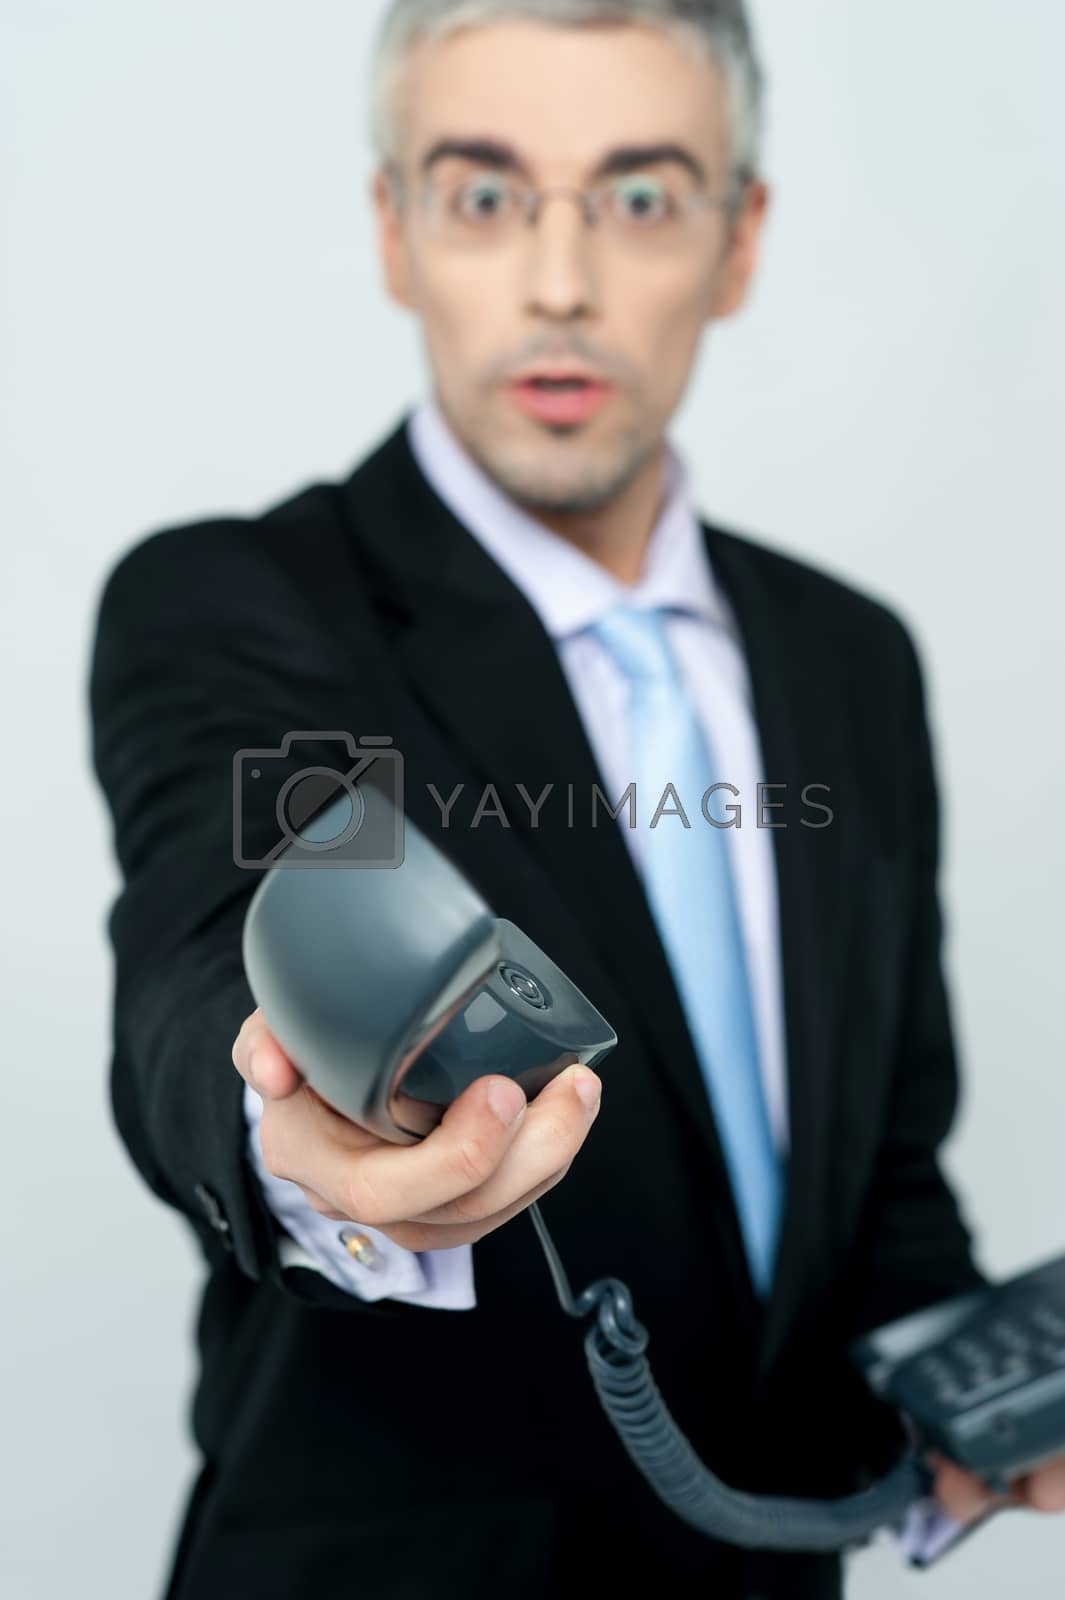 Royalty free image of Its an important business call for you by stockyimages